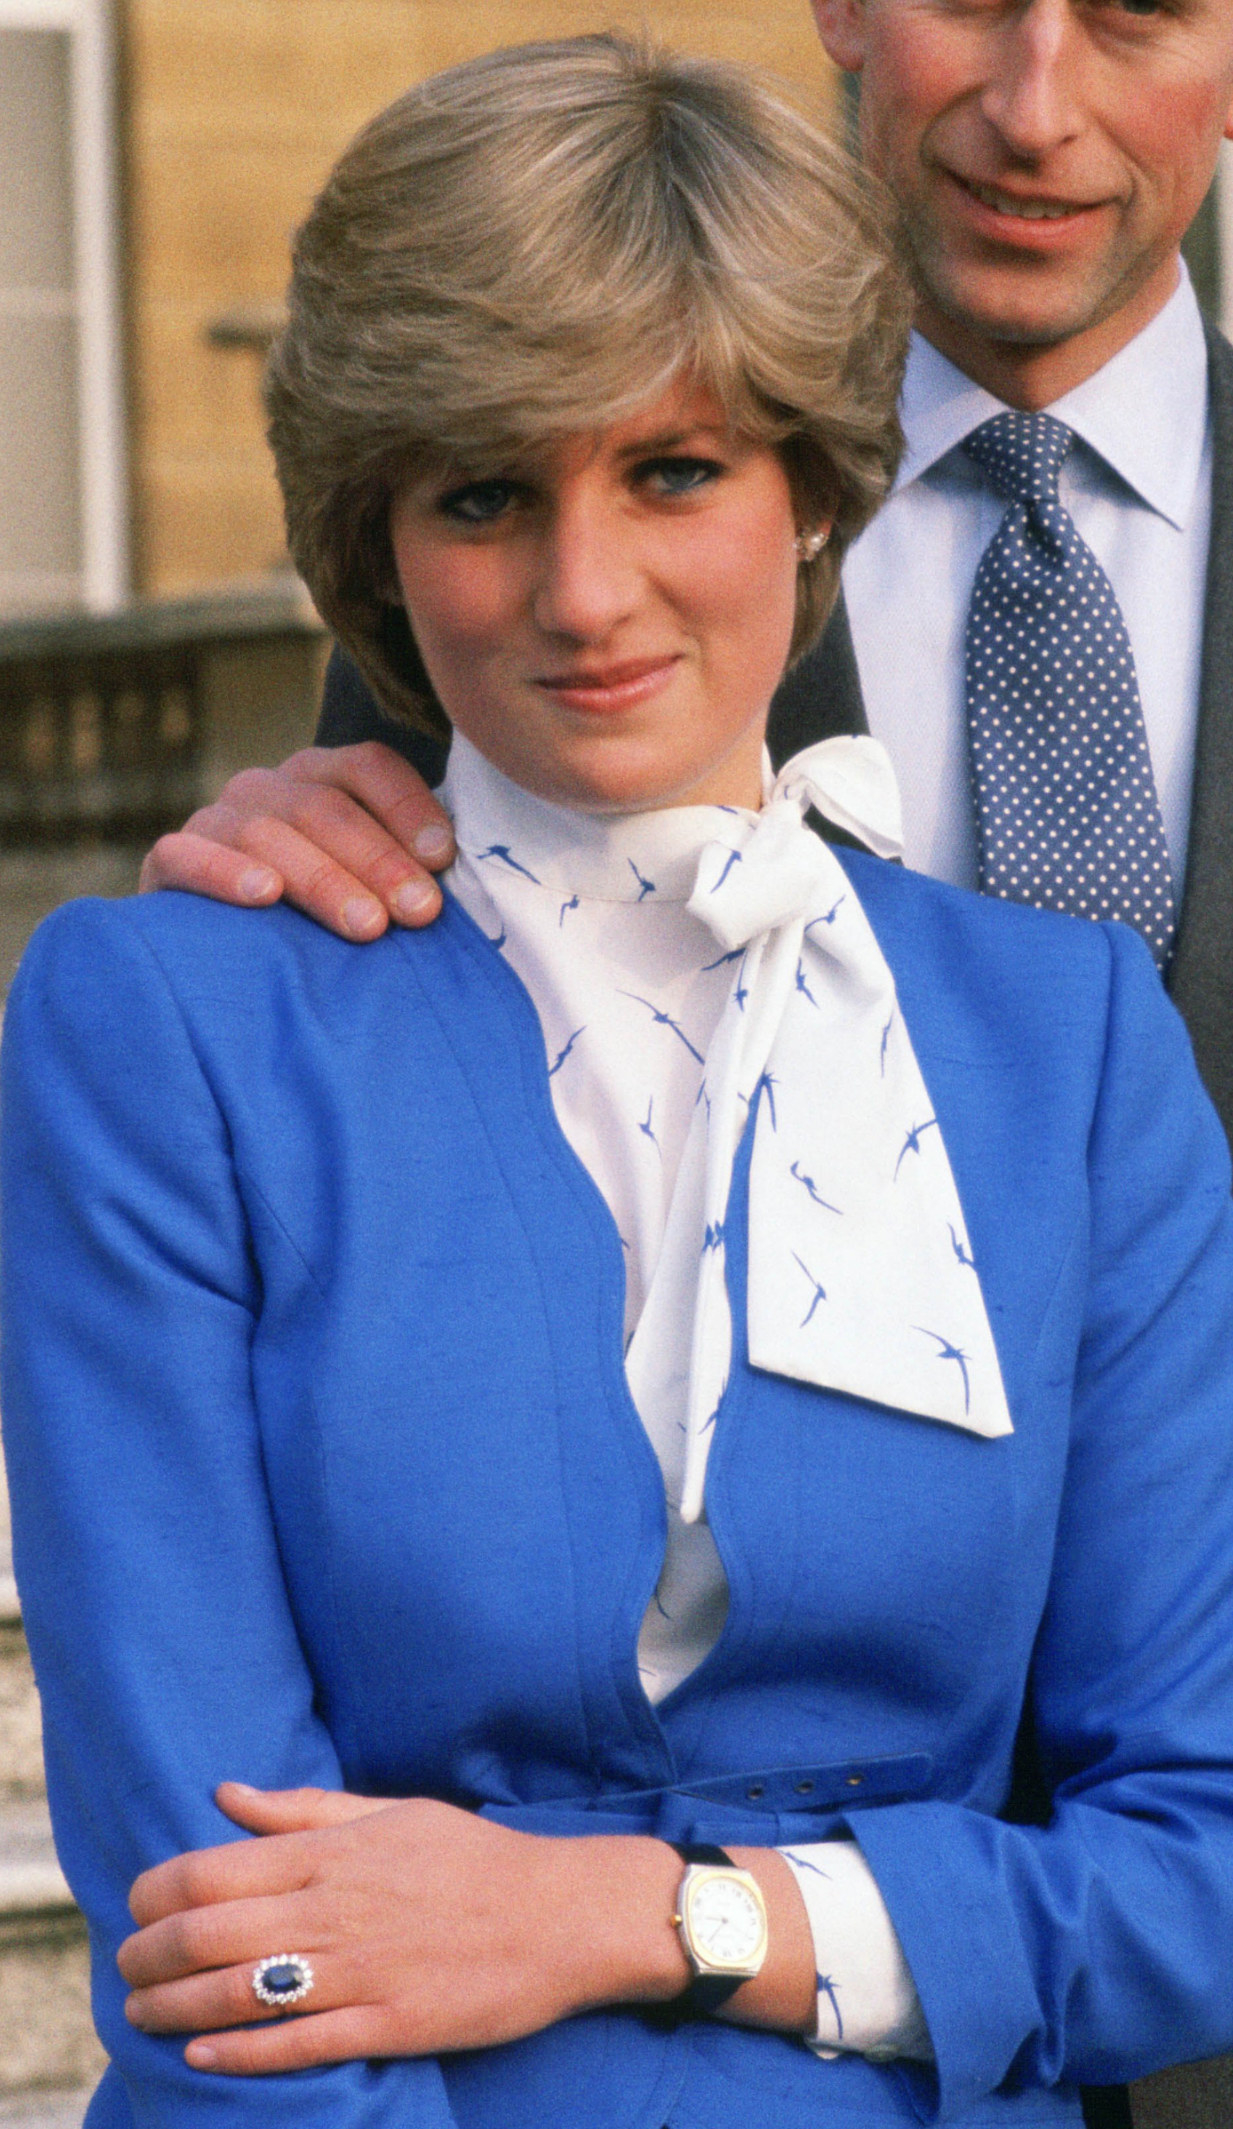 Princess Diana posing with her engagement ring in 1981